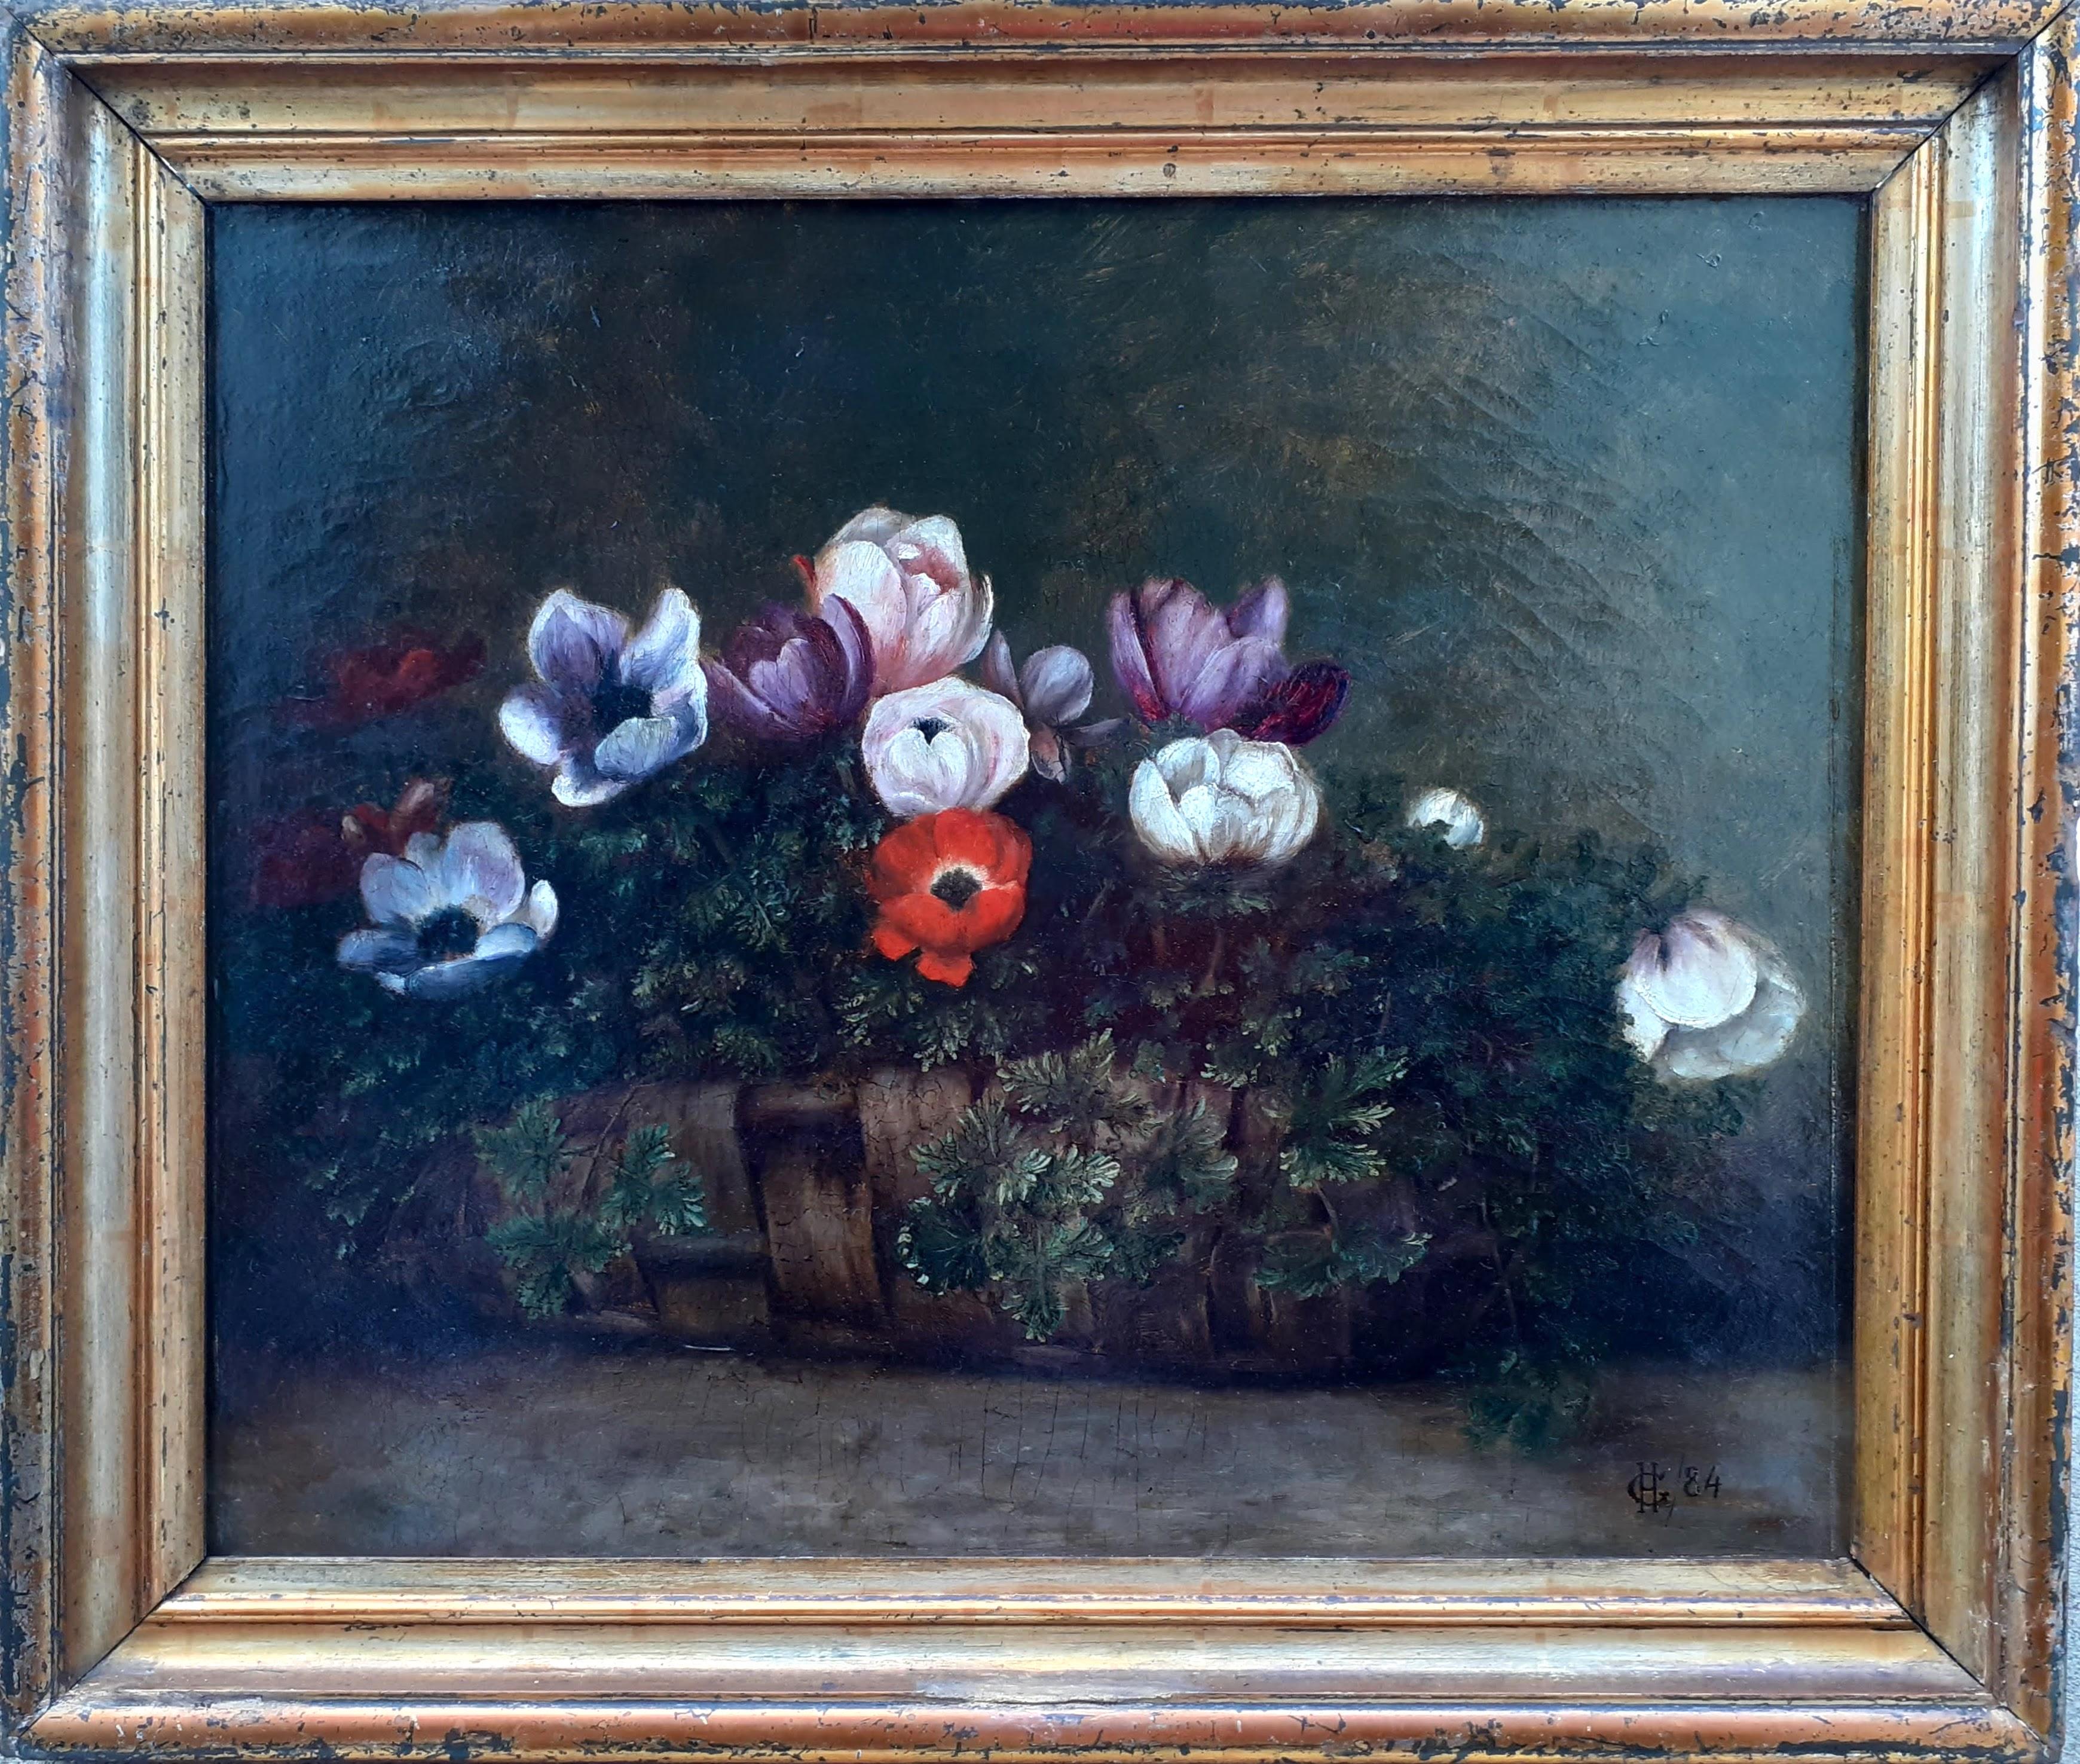 Unknown Figurative Painting - Wicket basket with Anemones a humble festive gift 19th century floral still life